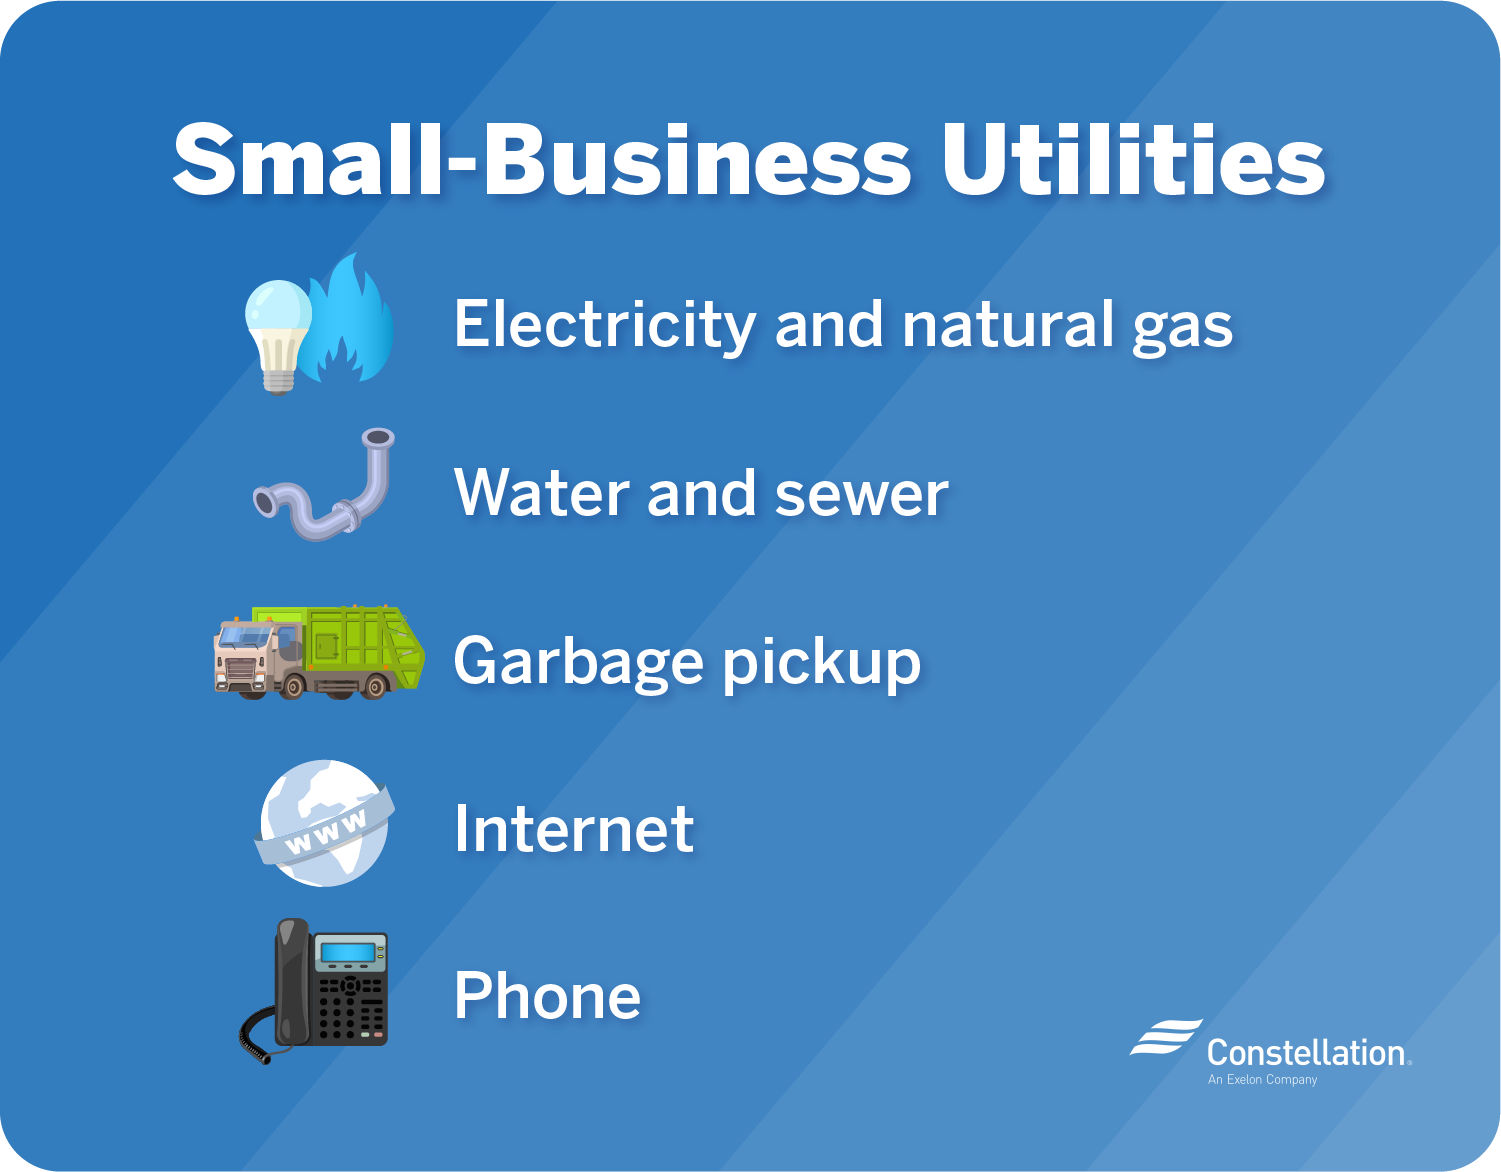 Small-business utilities